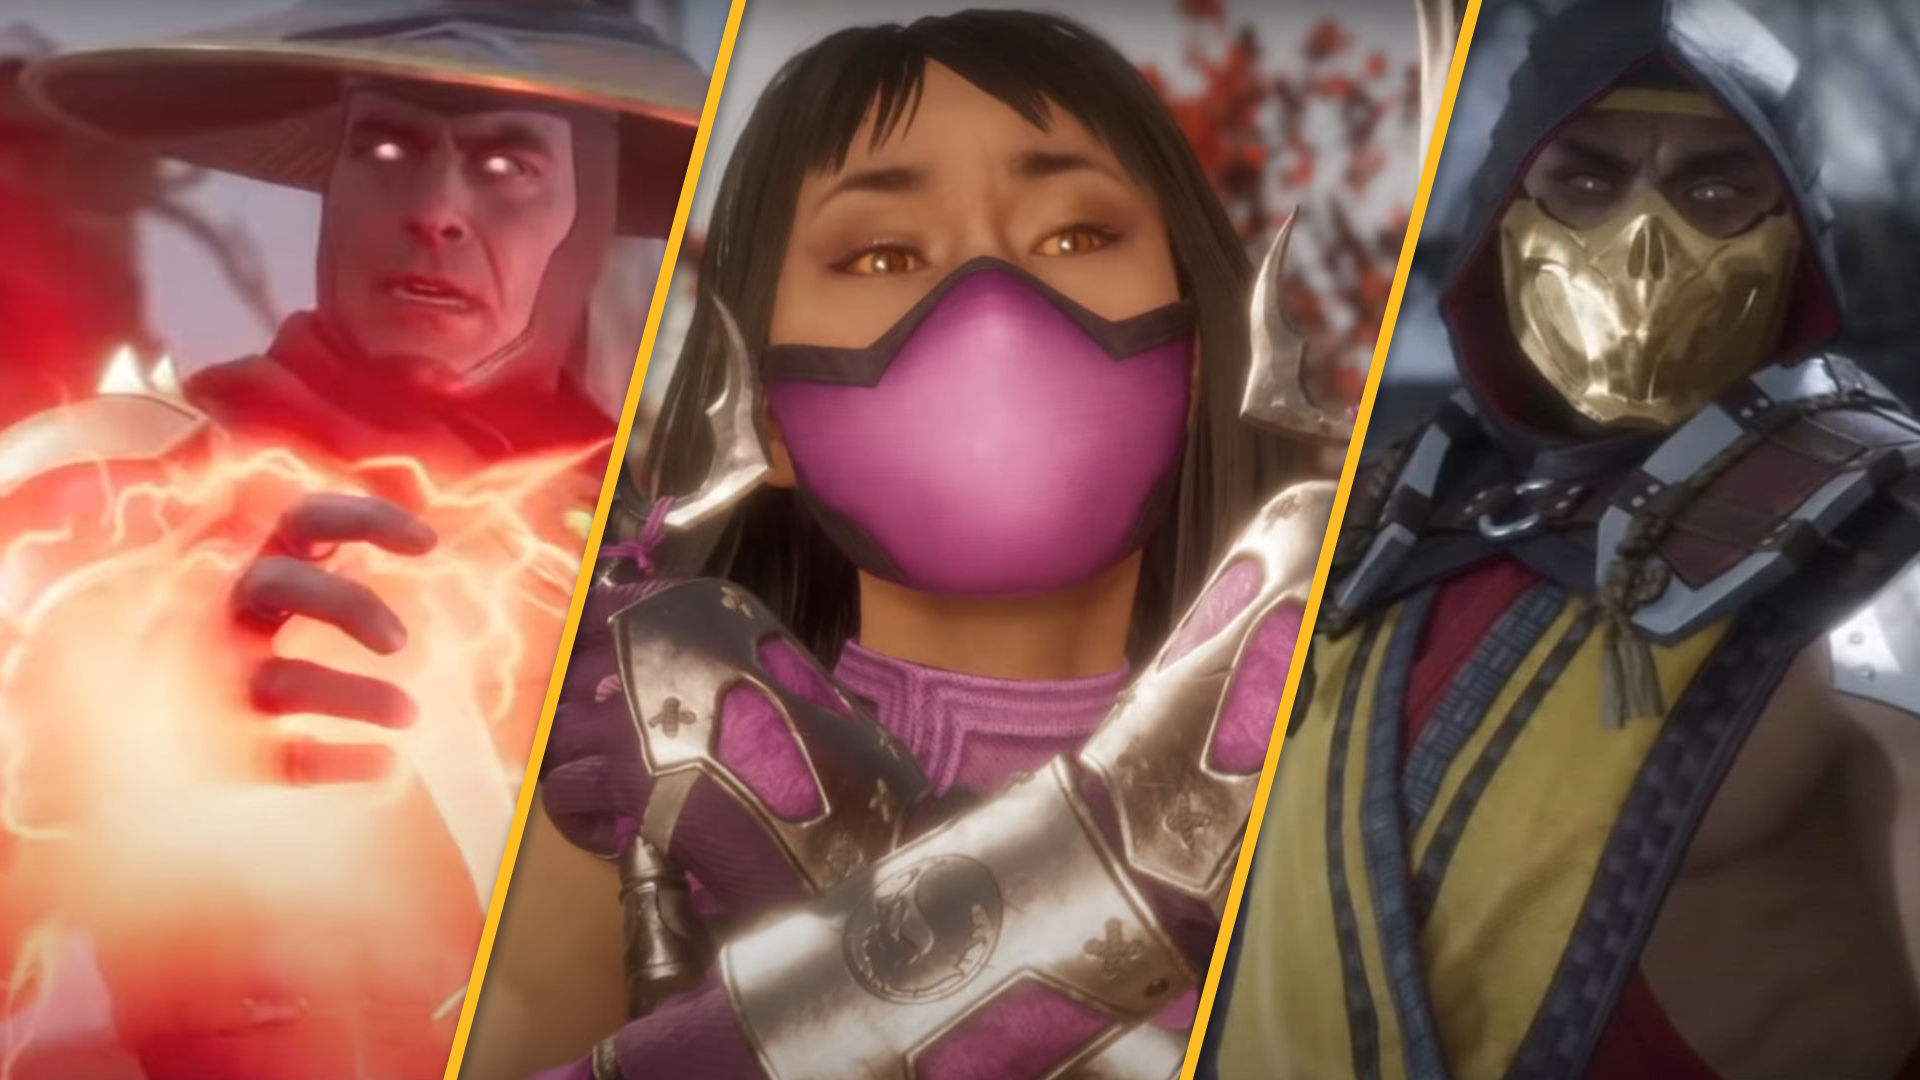 mortal kombat characters pictures and names